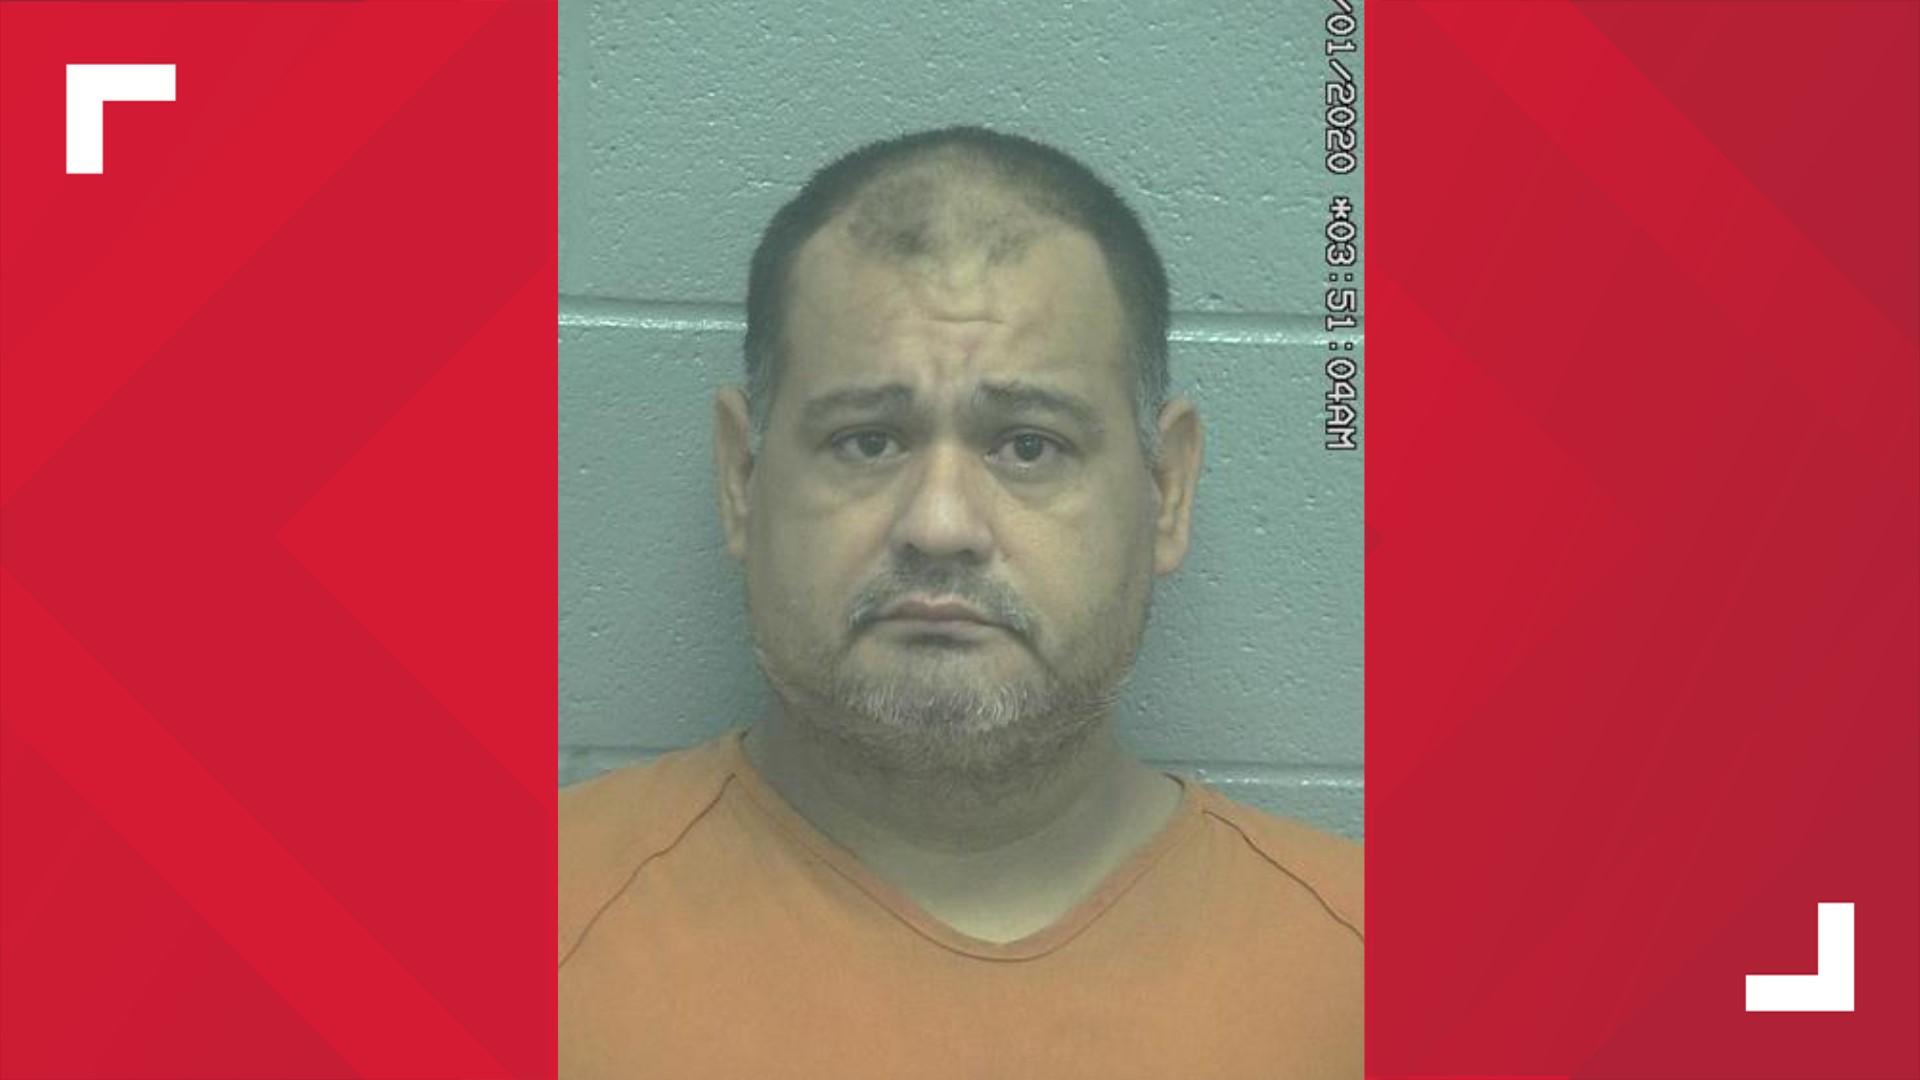 Jesus Trevino Castillo, 46, was charged with two counts of aggravated sexual assault of a child and five counts of indecency with a child.